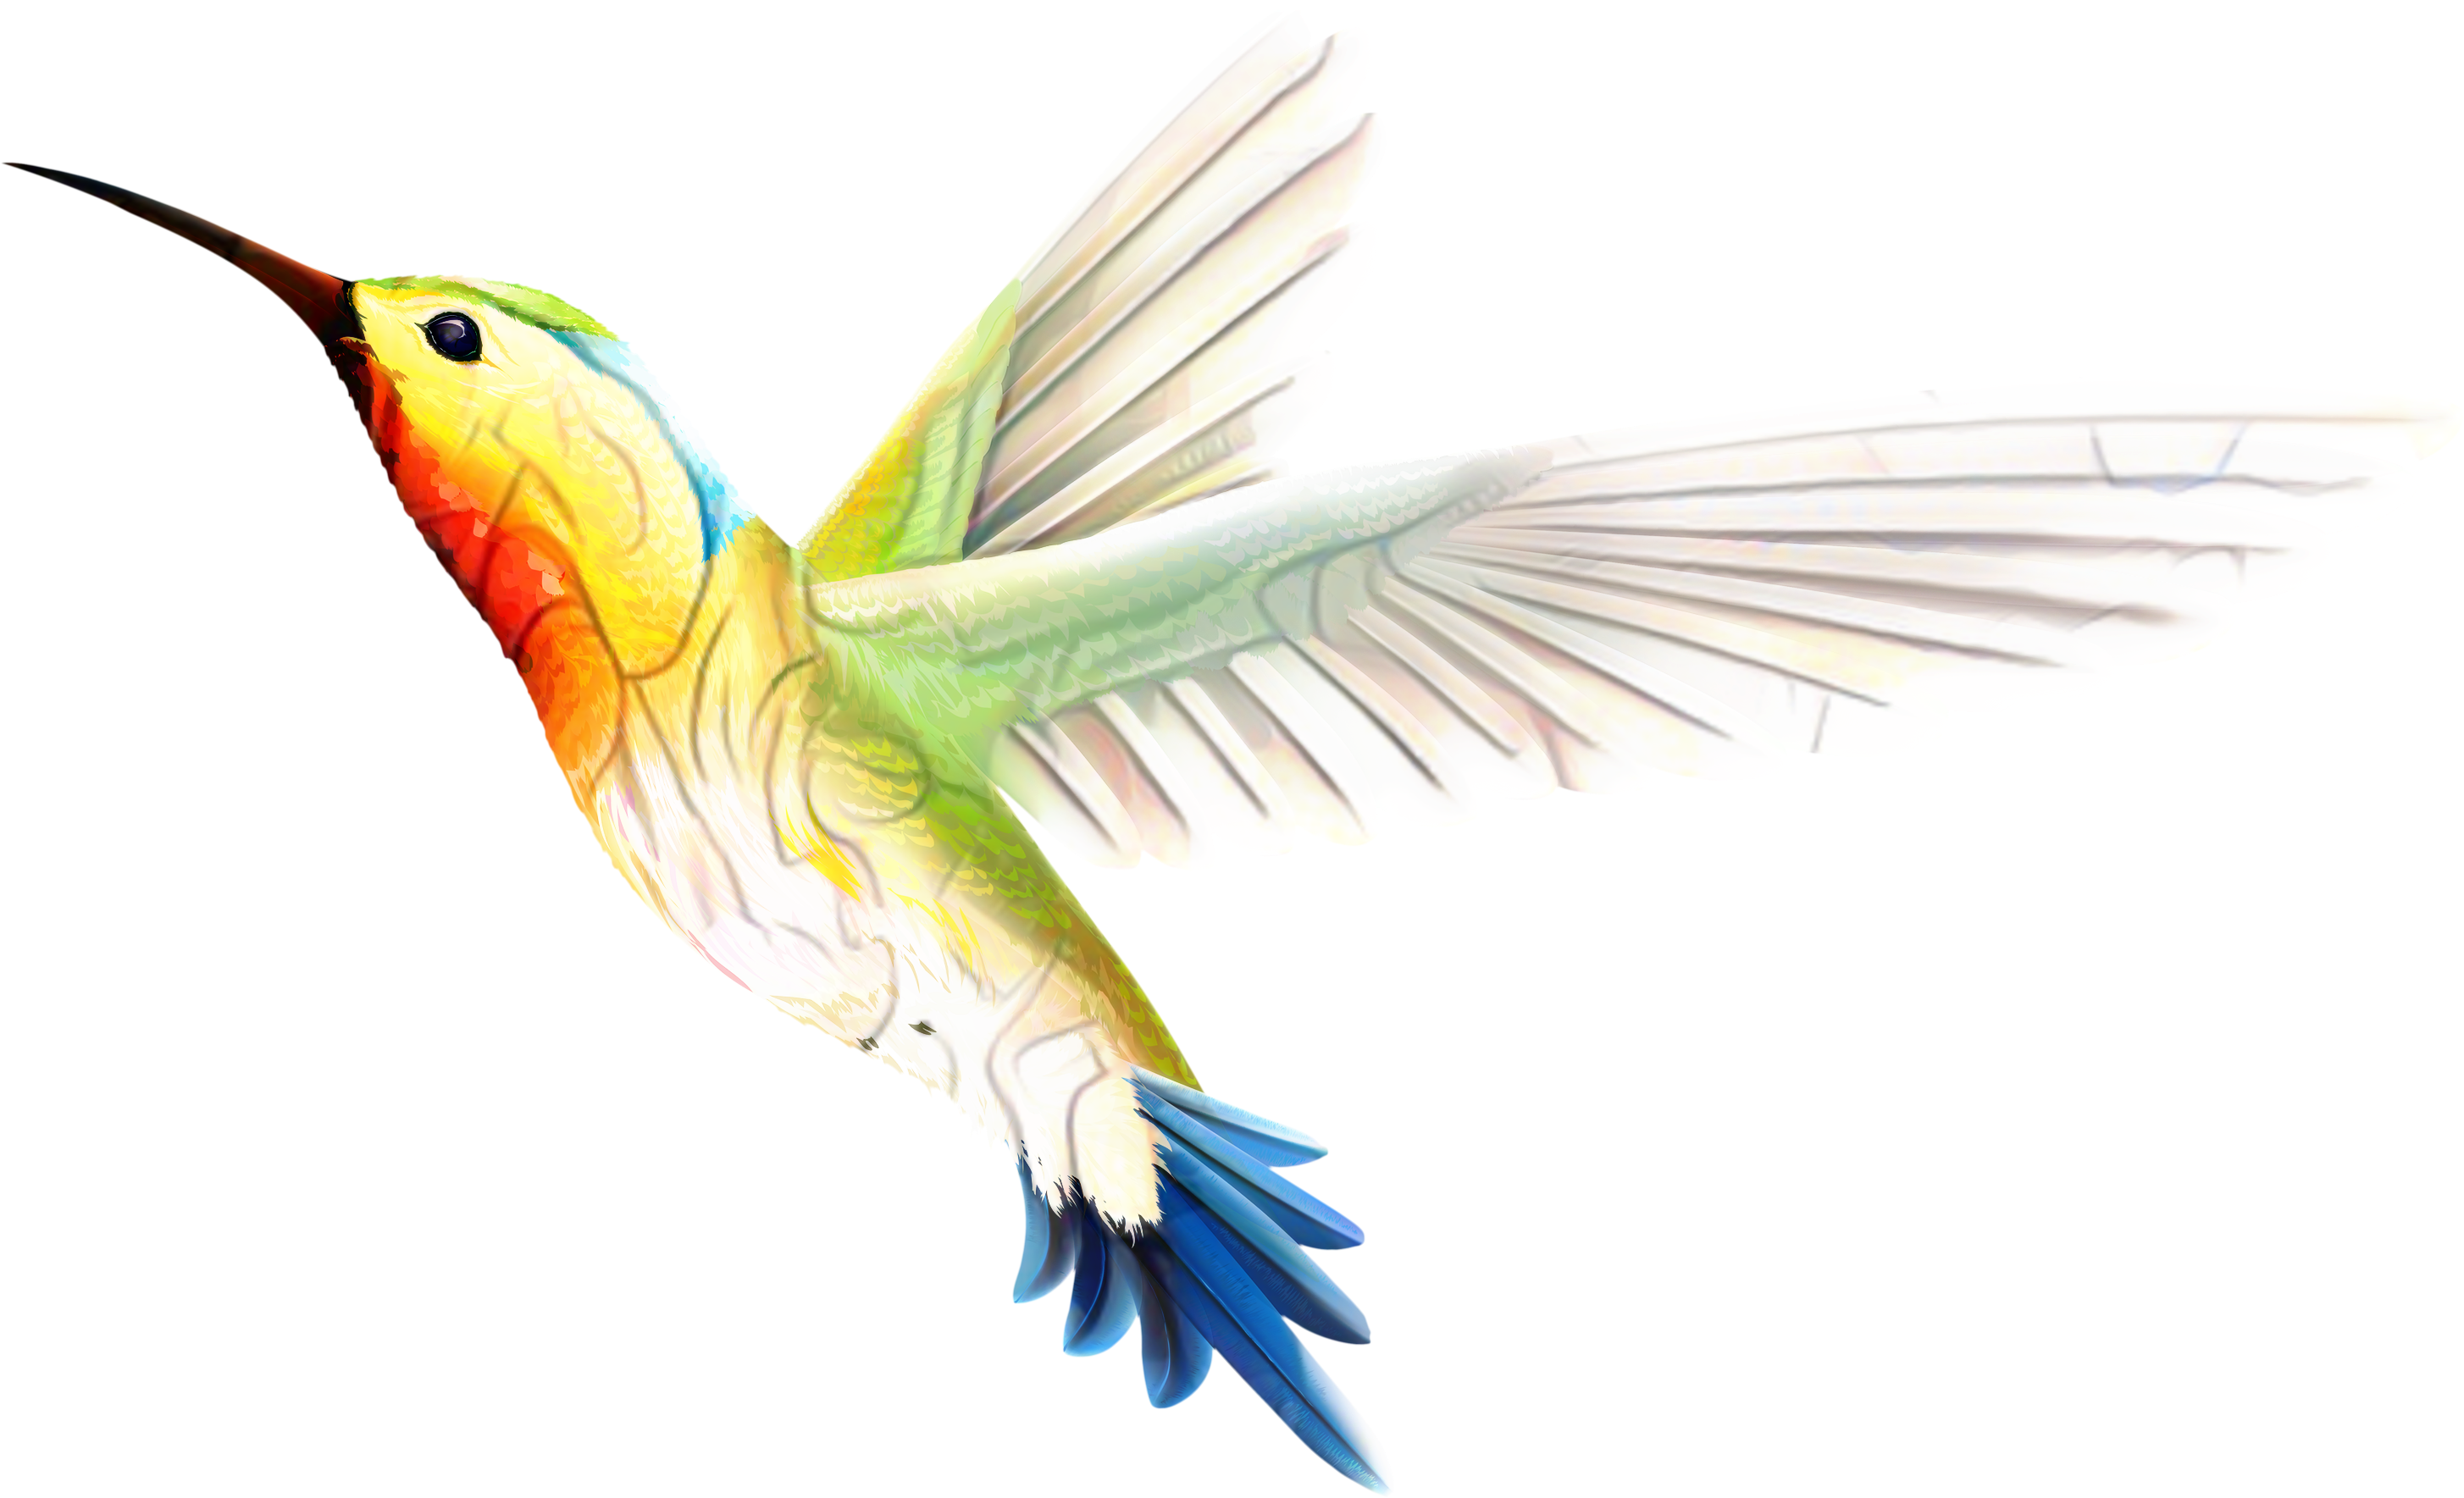 A Colorful Bird Flying In The Sky